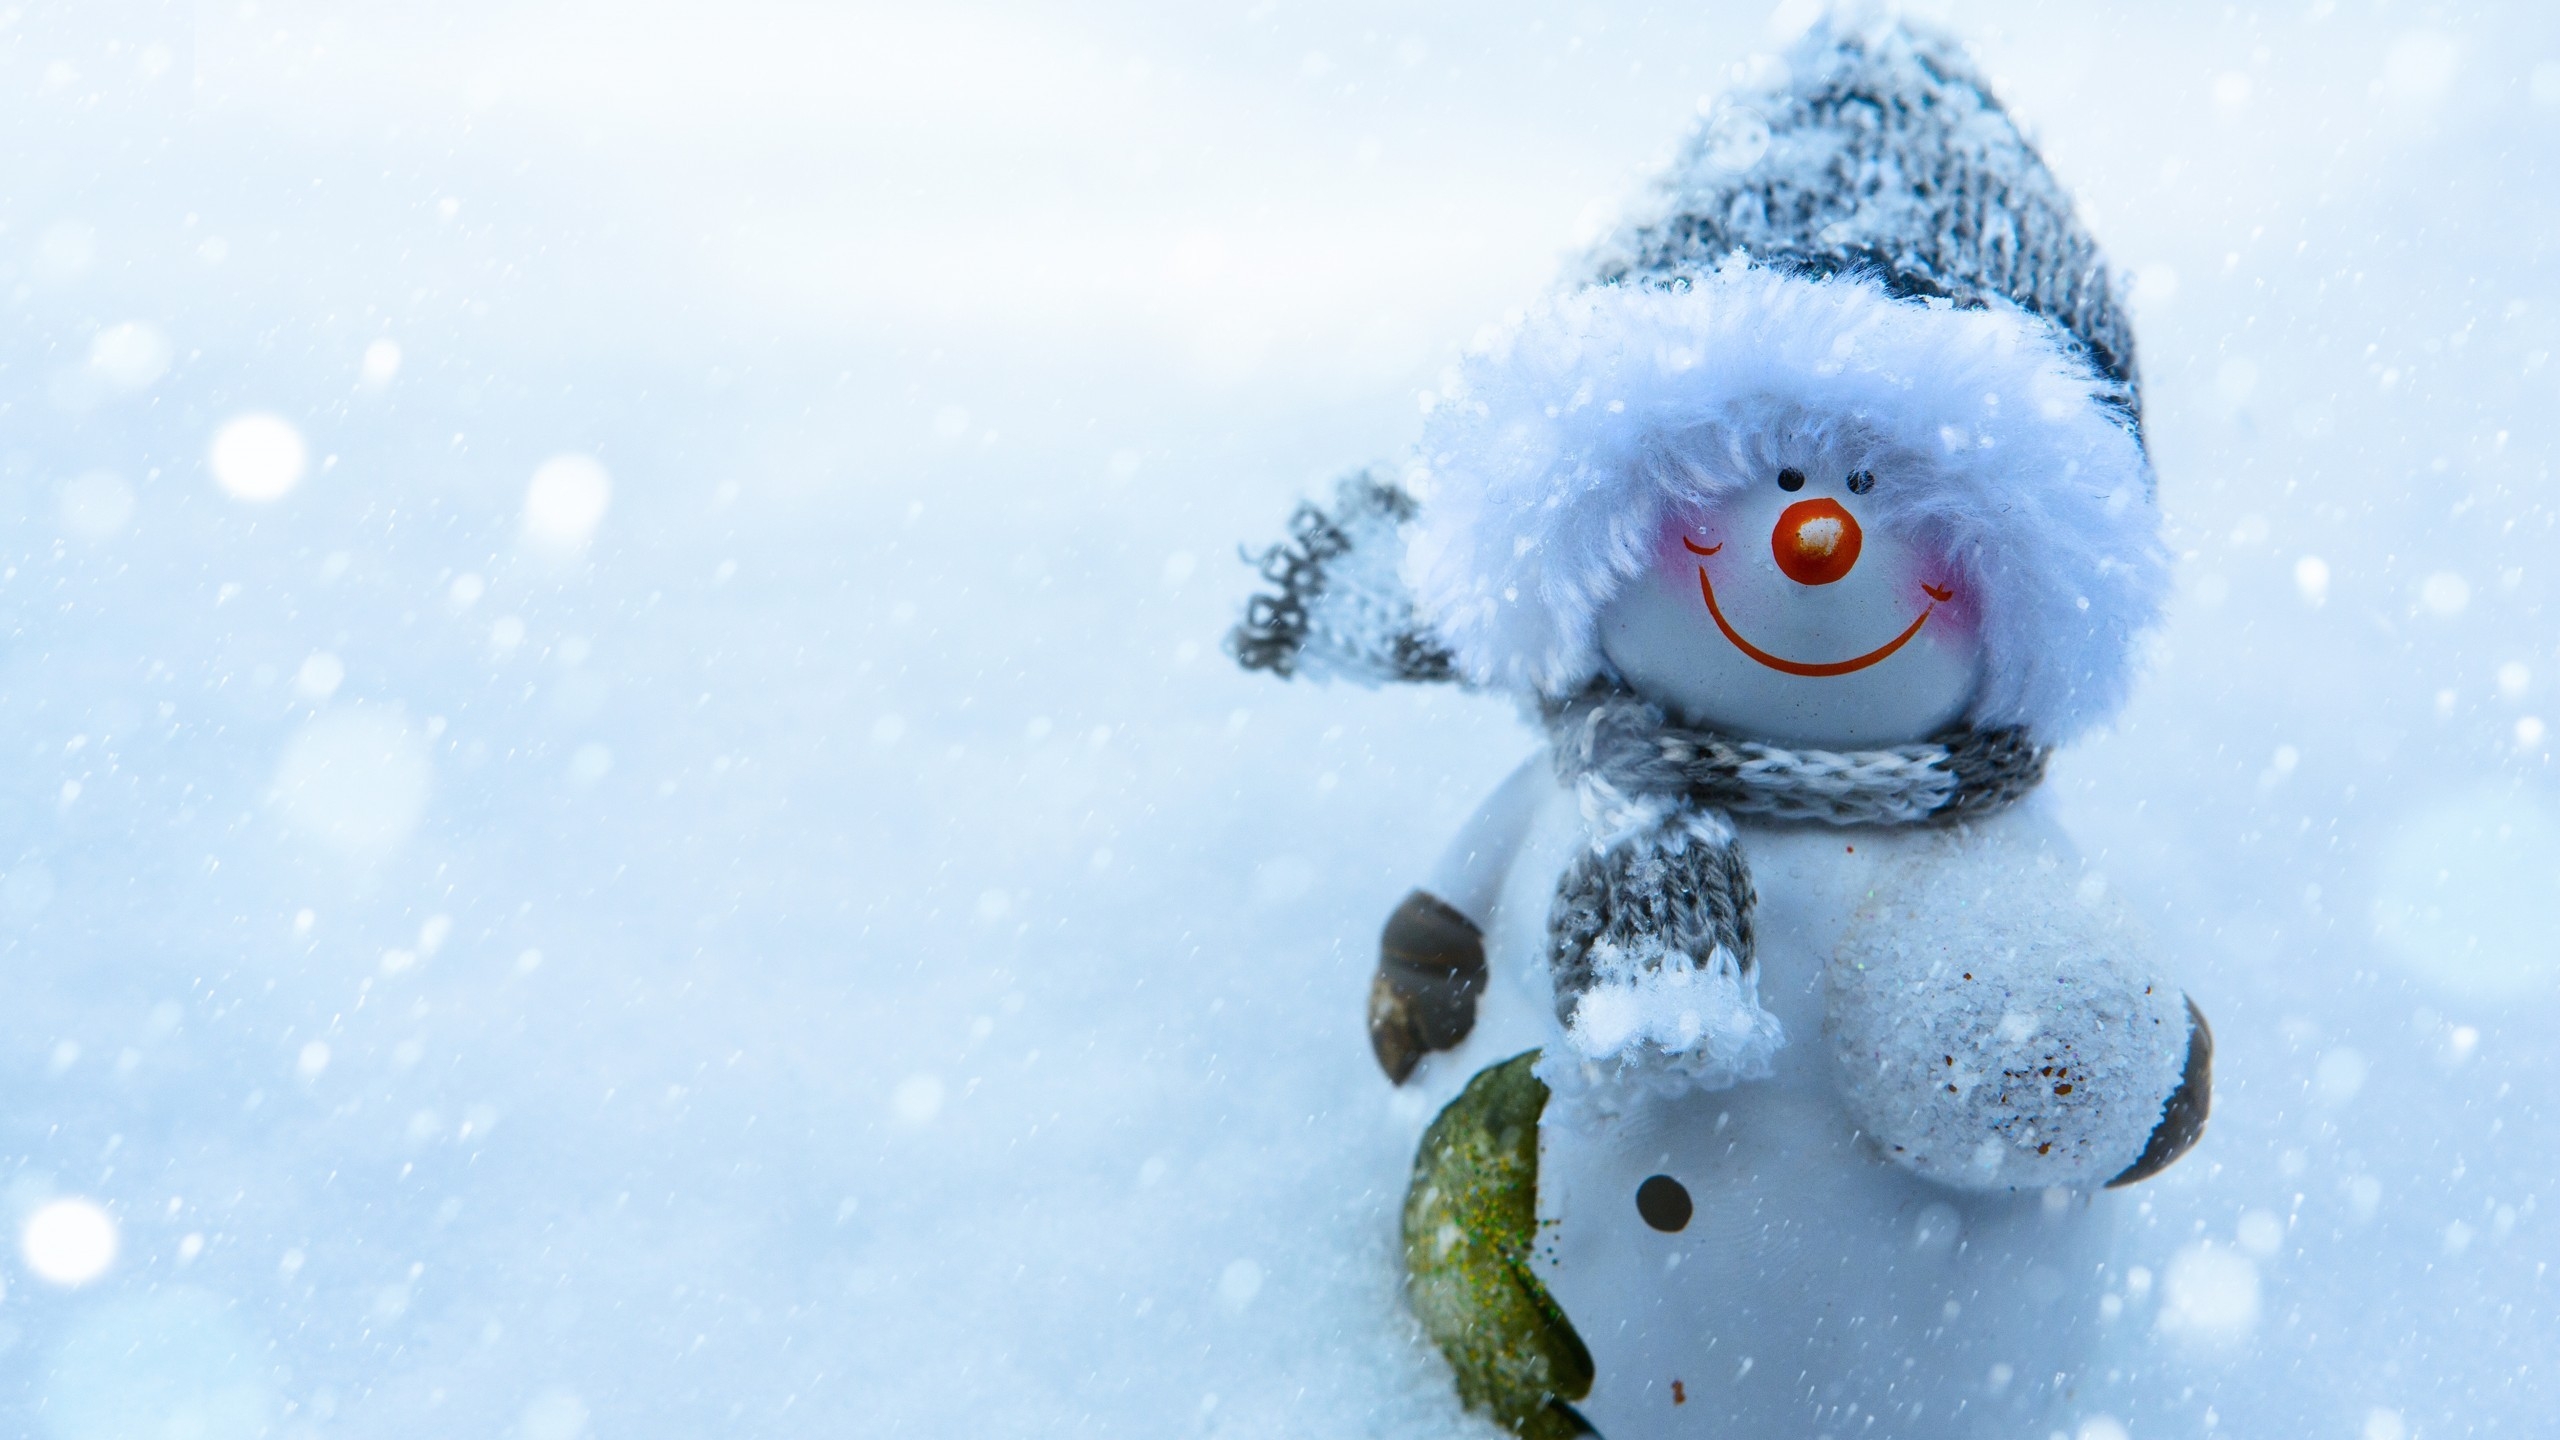 Snowman Smiling for 2560x1440 HDTV resolution